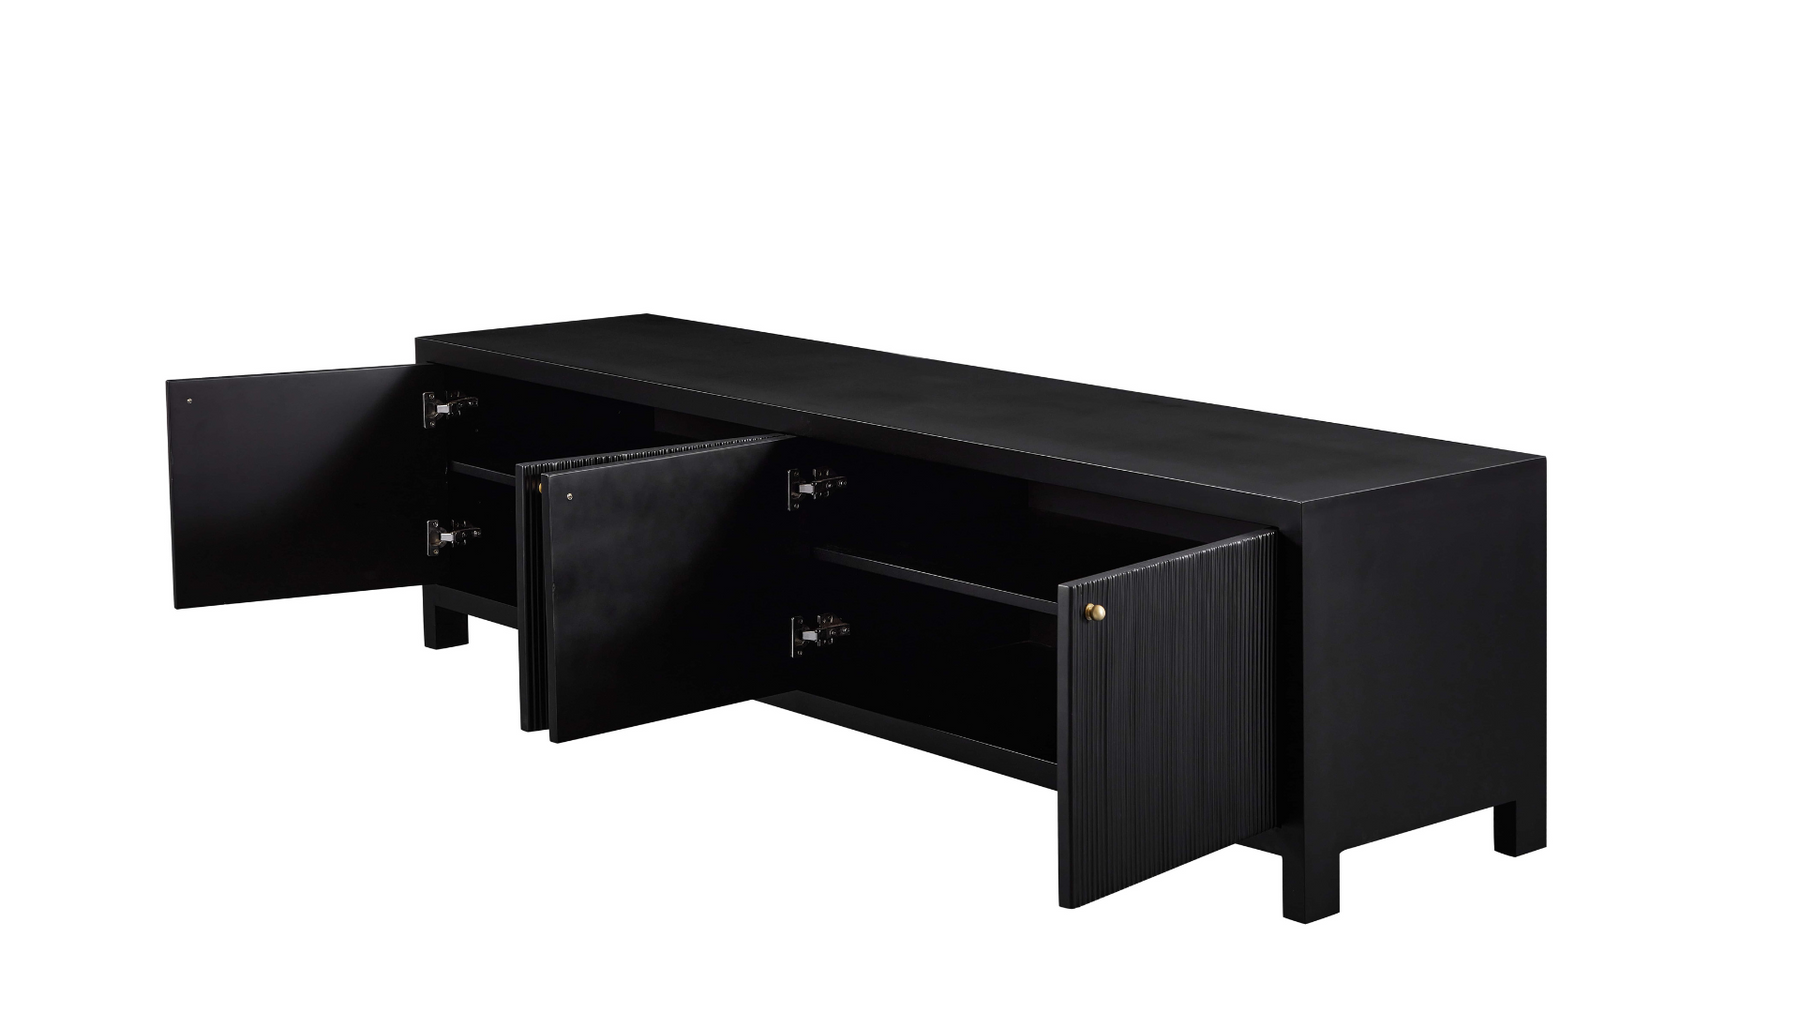 Bentley Ridge Entertainment Unit - Black Open Compartments in Angled Side View in White Background